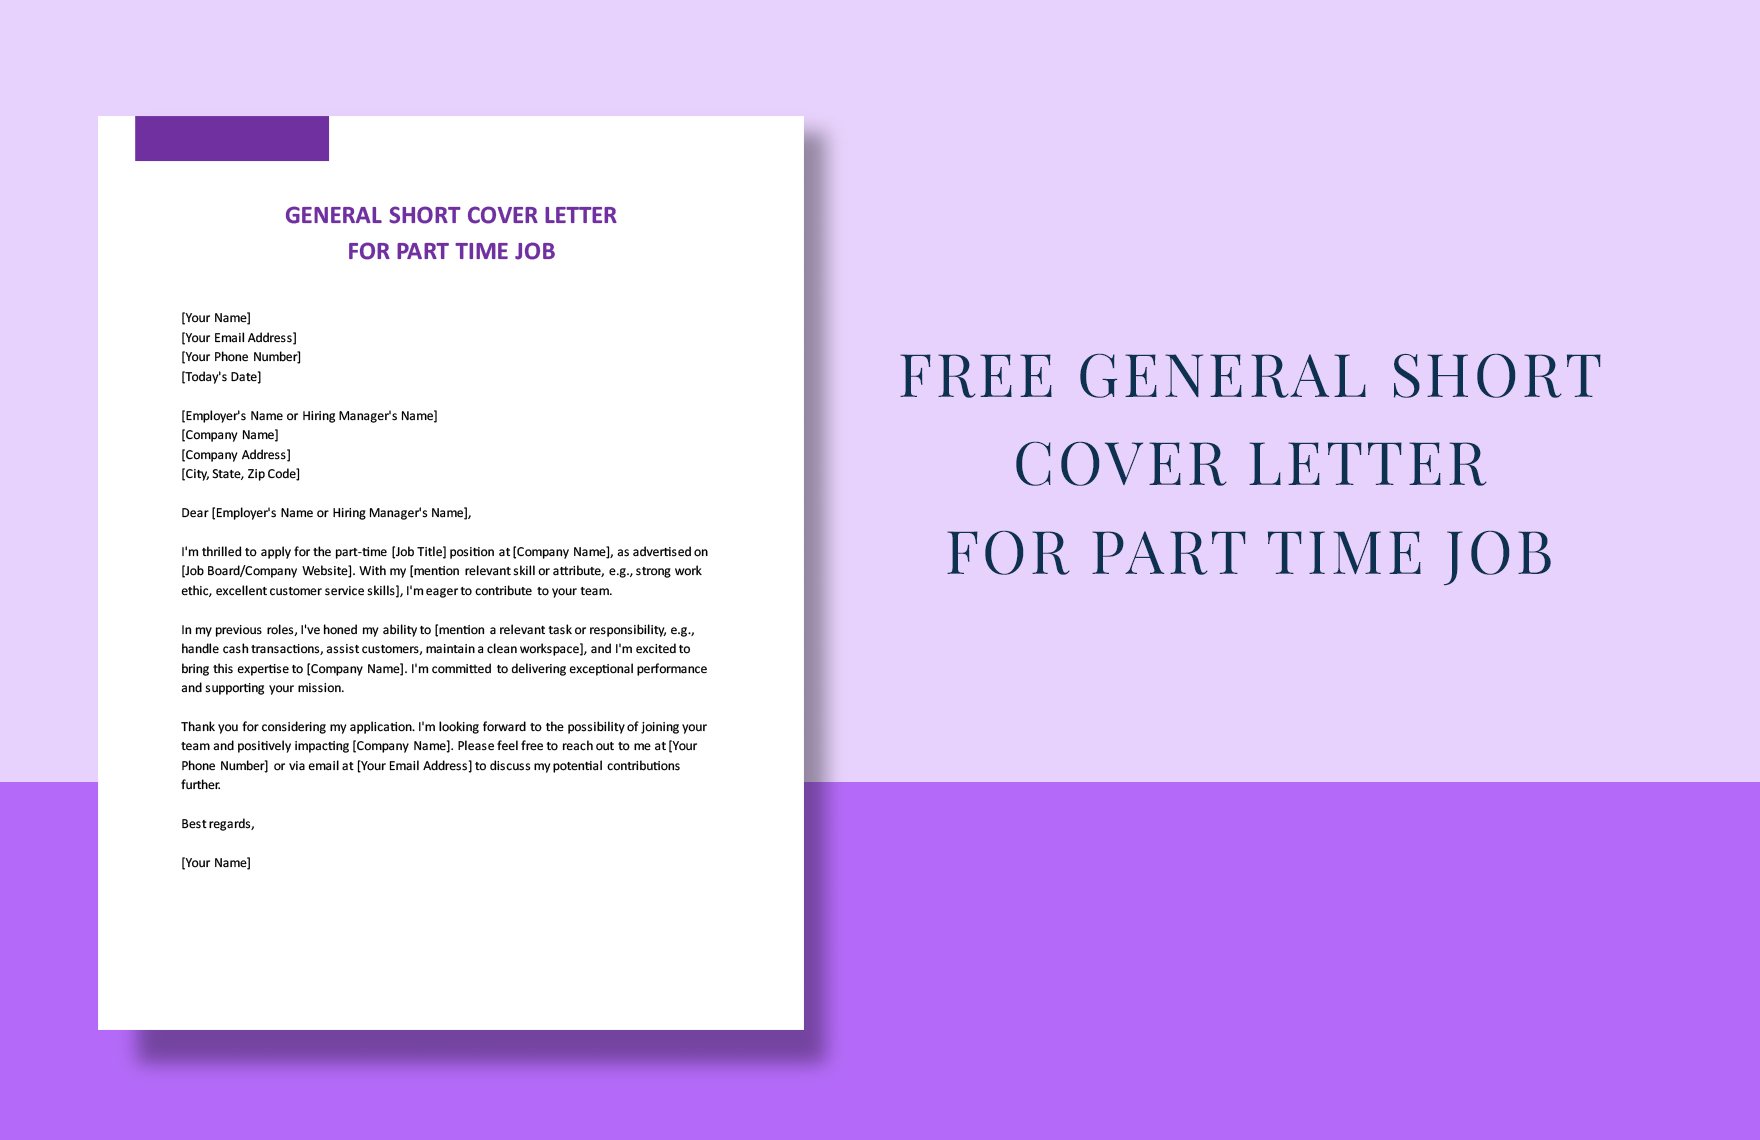 General Short Cover Letter for Part Time Job Template